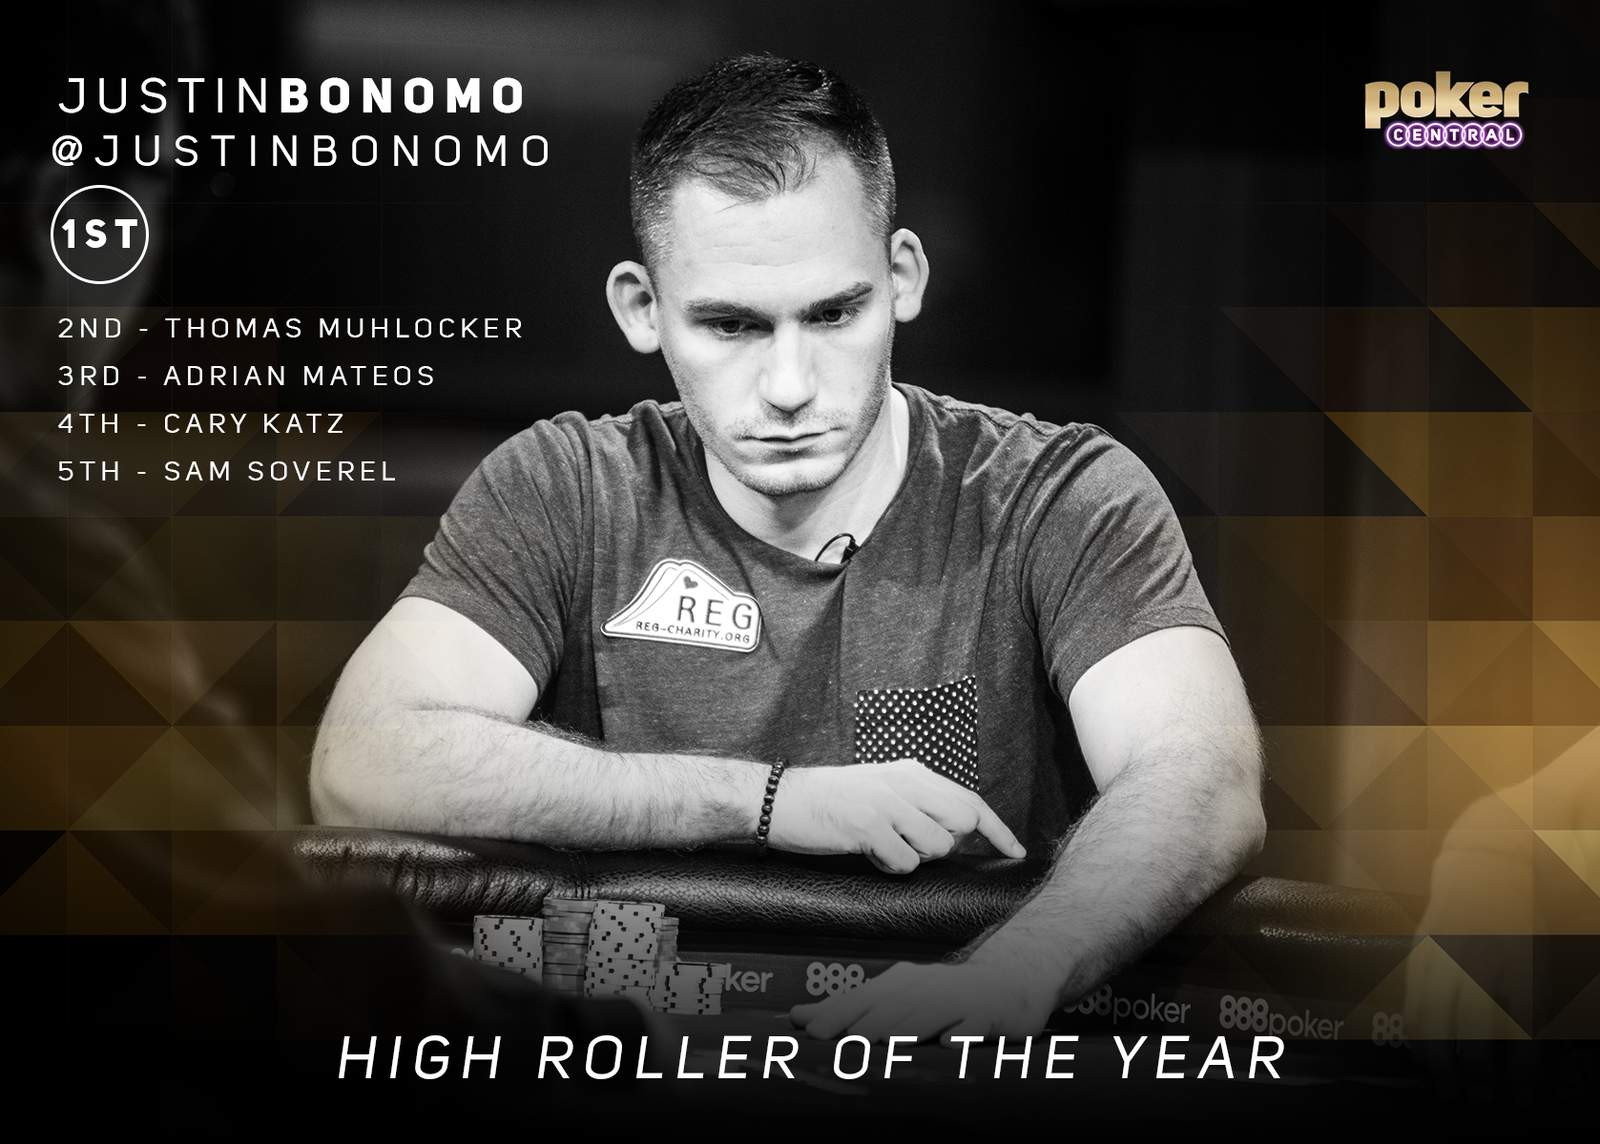 High Roller of the Year: Back-To-Back Bonomo